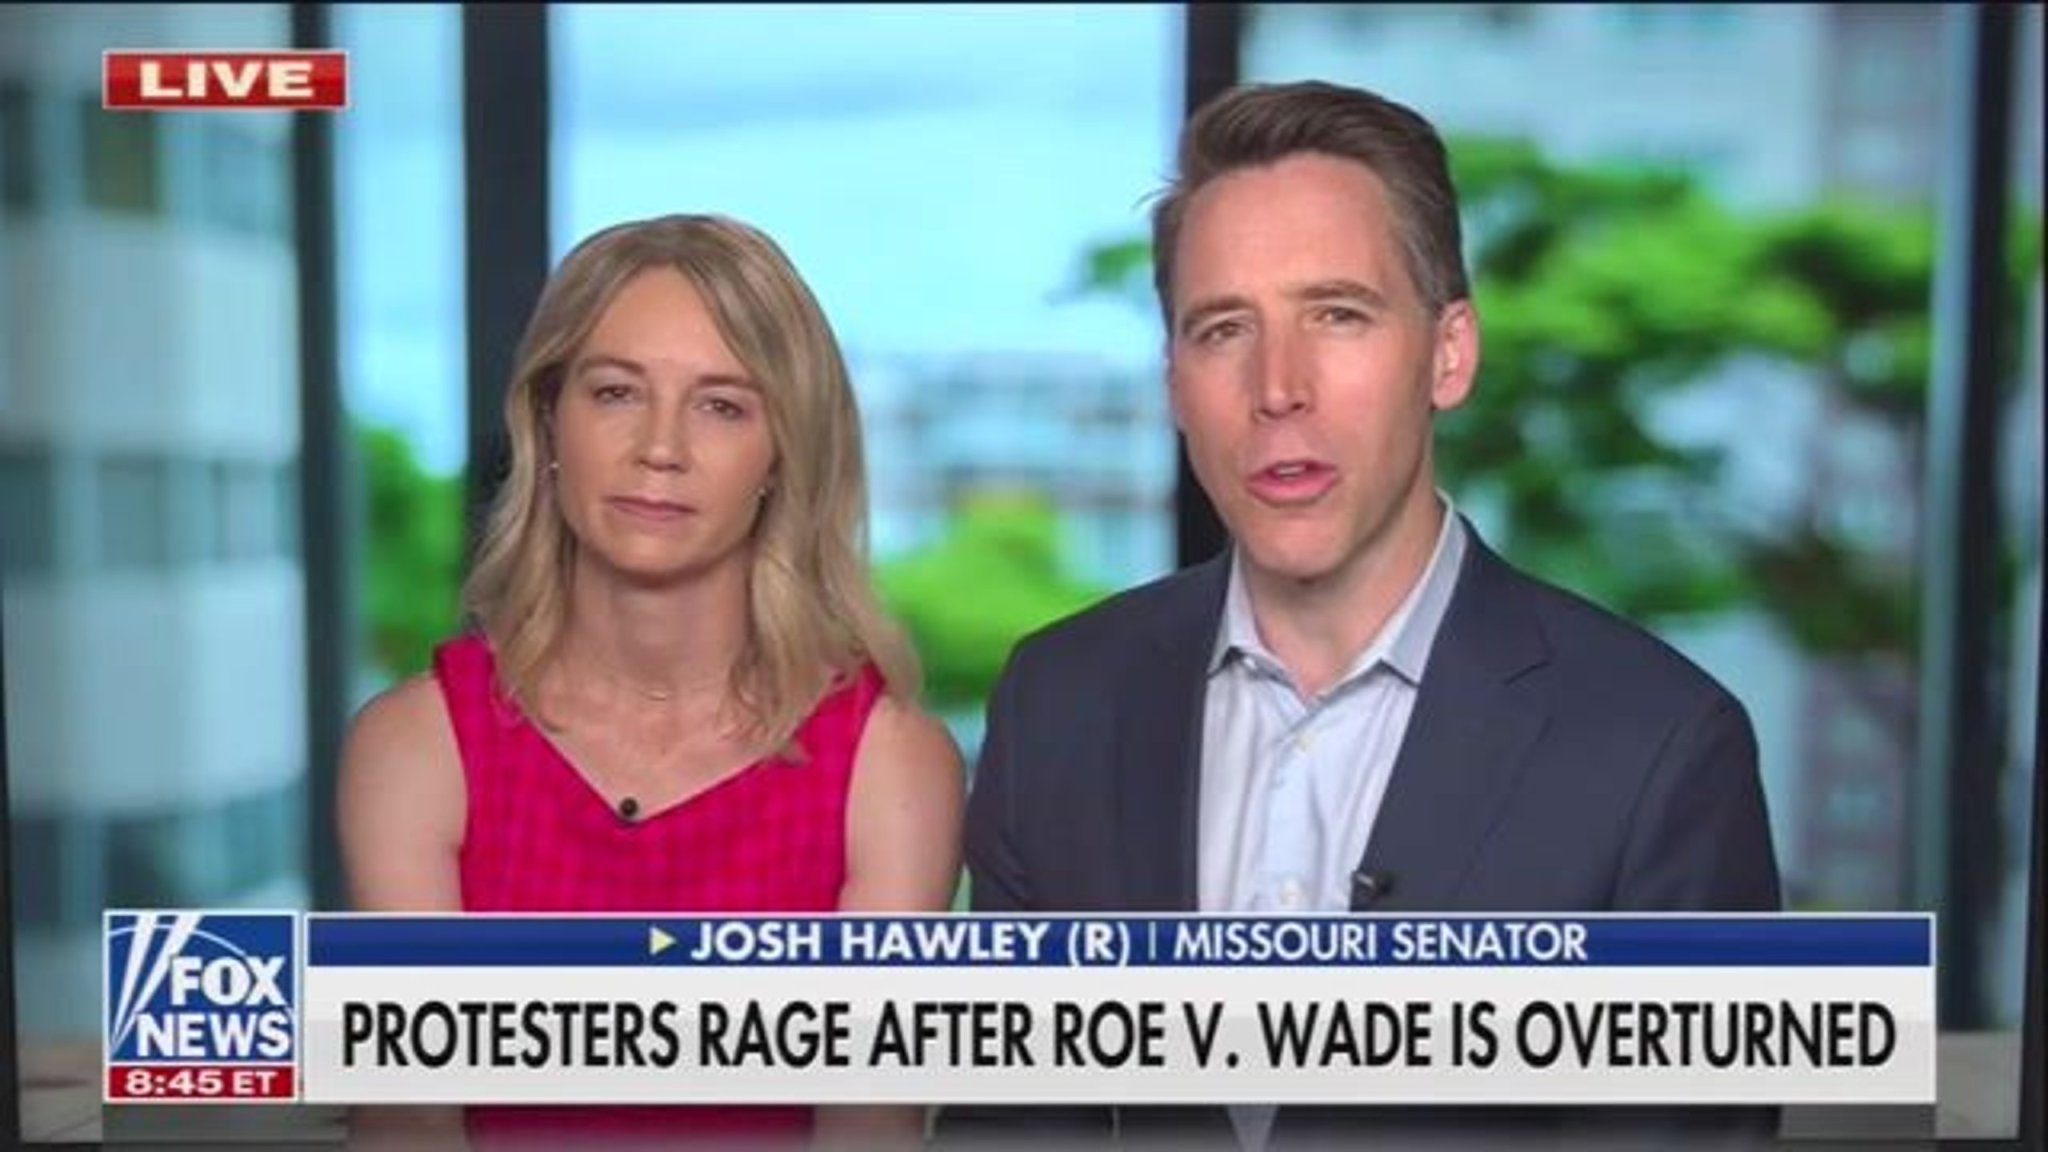 Sen. Josh Hawley (R-MO) claims Democrats opposing the overturning of Roe v. Wade is “anti-democratic.”